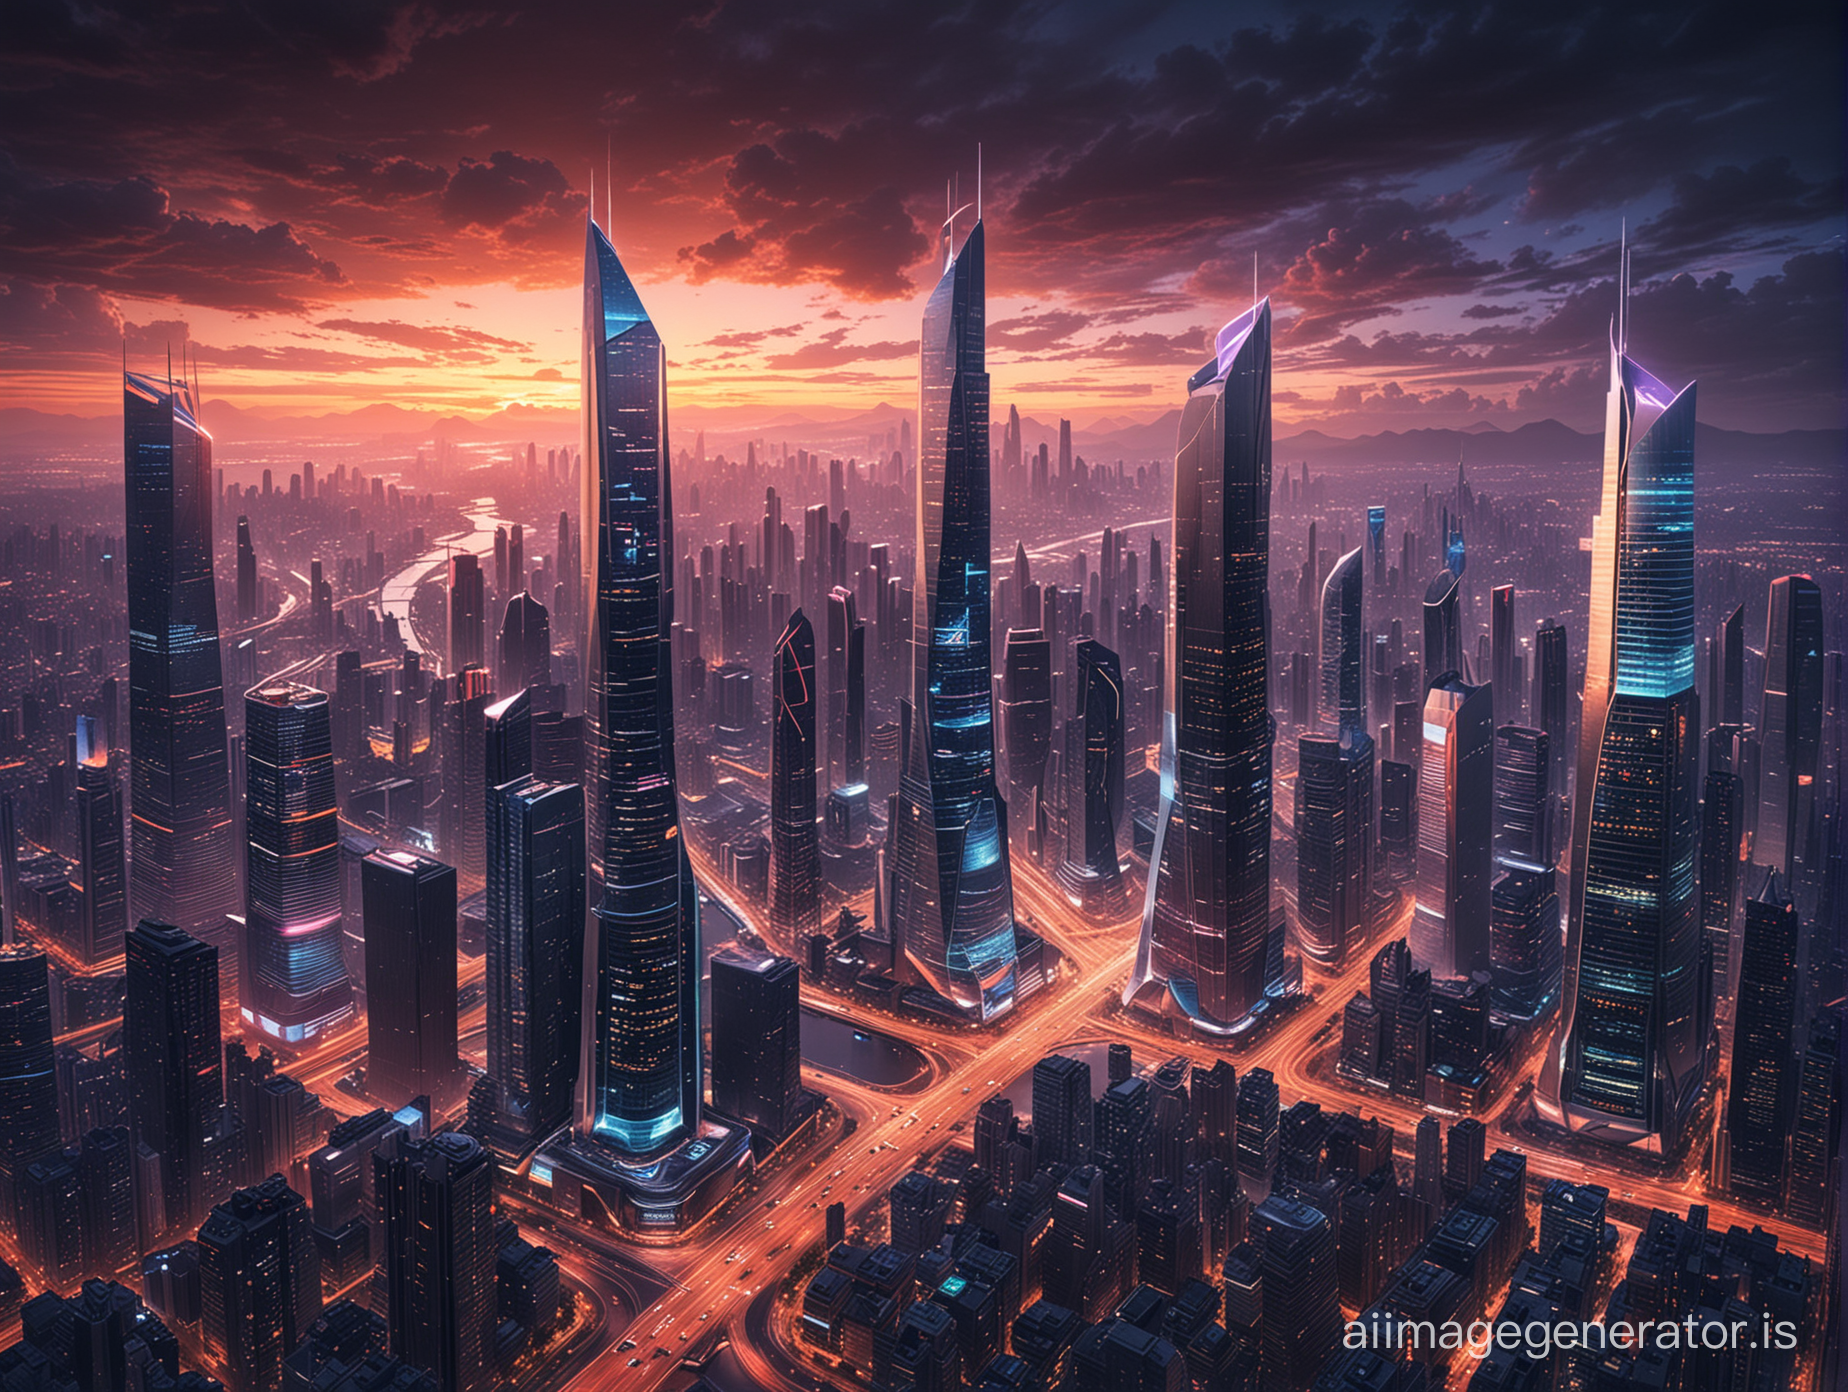 Create a futuristic cityscape infused with technology, with sleek skyscrapers and glowing neon lights stretching into the sky amidst a backdrop of advanced infrastructure and bustling activity, conveying a sense of urban sophistication and technological advancement.